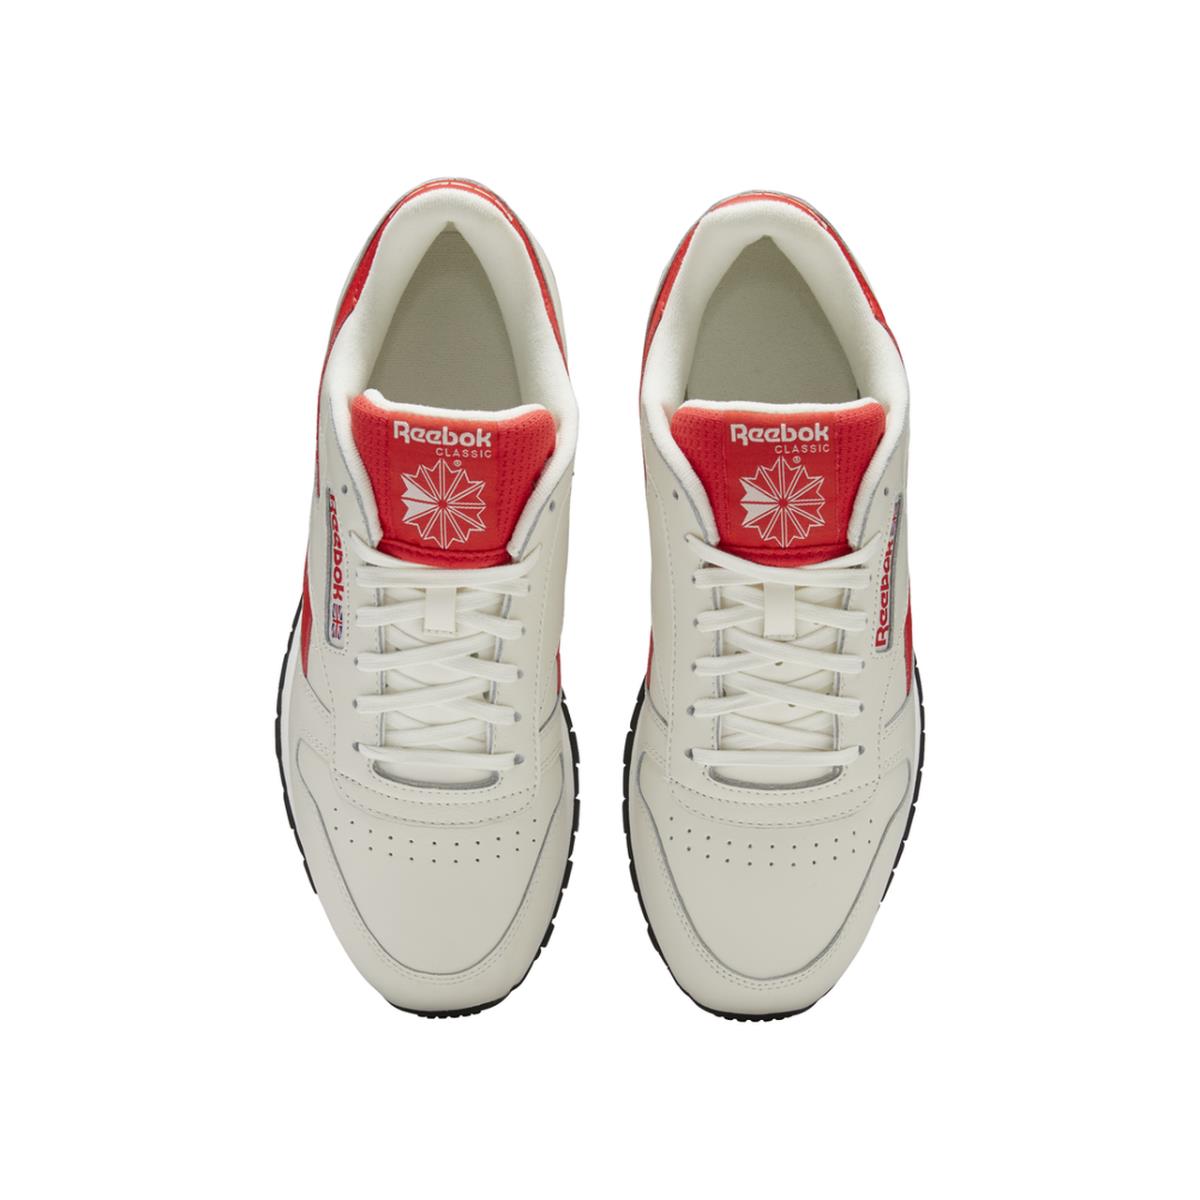 Reebok shoes Classic Leather - Chalk/Rad Red 3